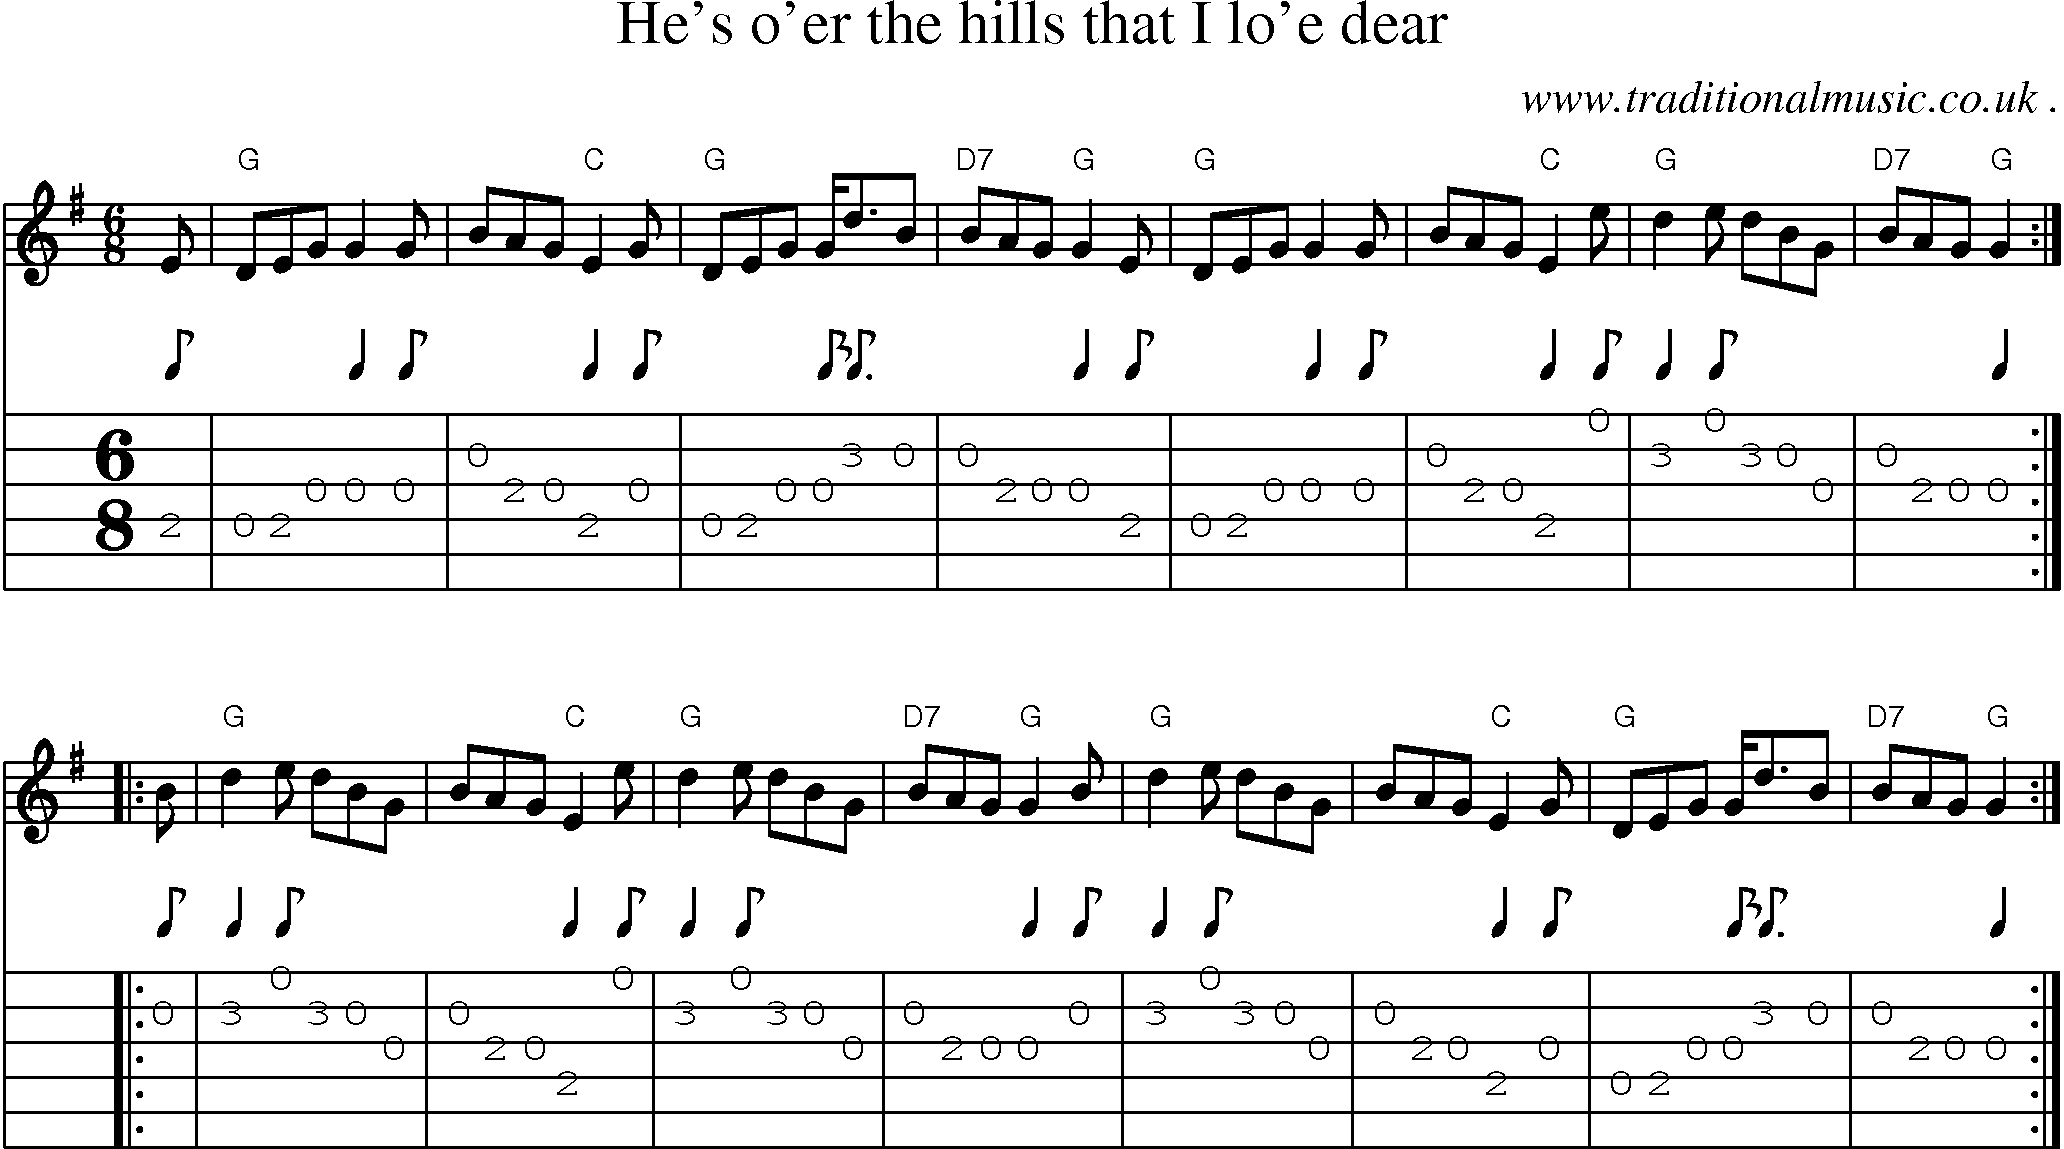 Sheet-music  score, Chords and Guitar Tabs for Hes Oer The Hills That I Loe Dear